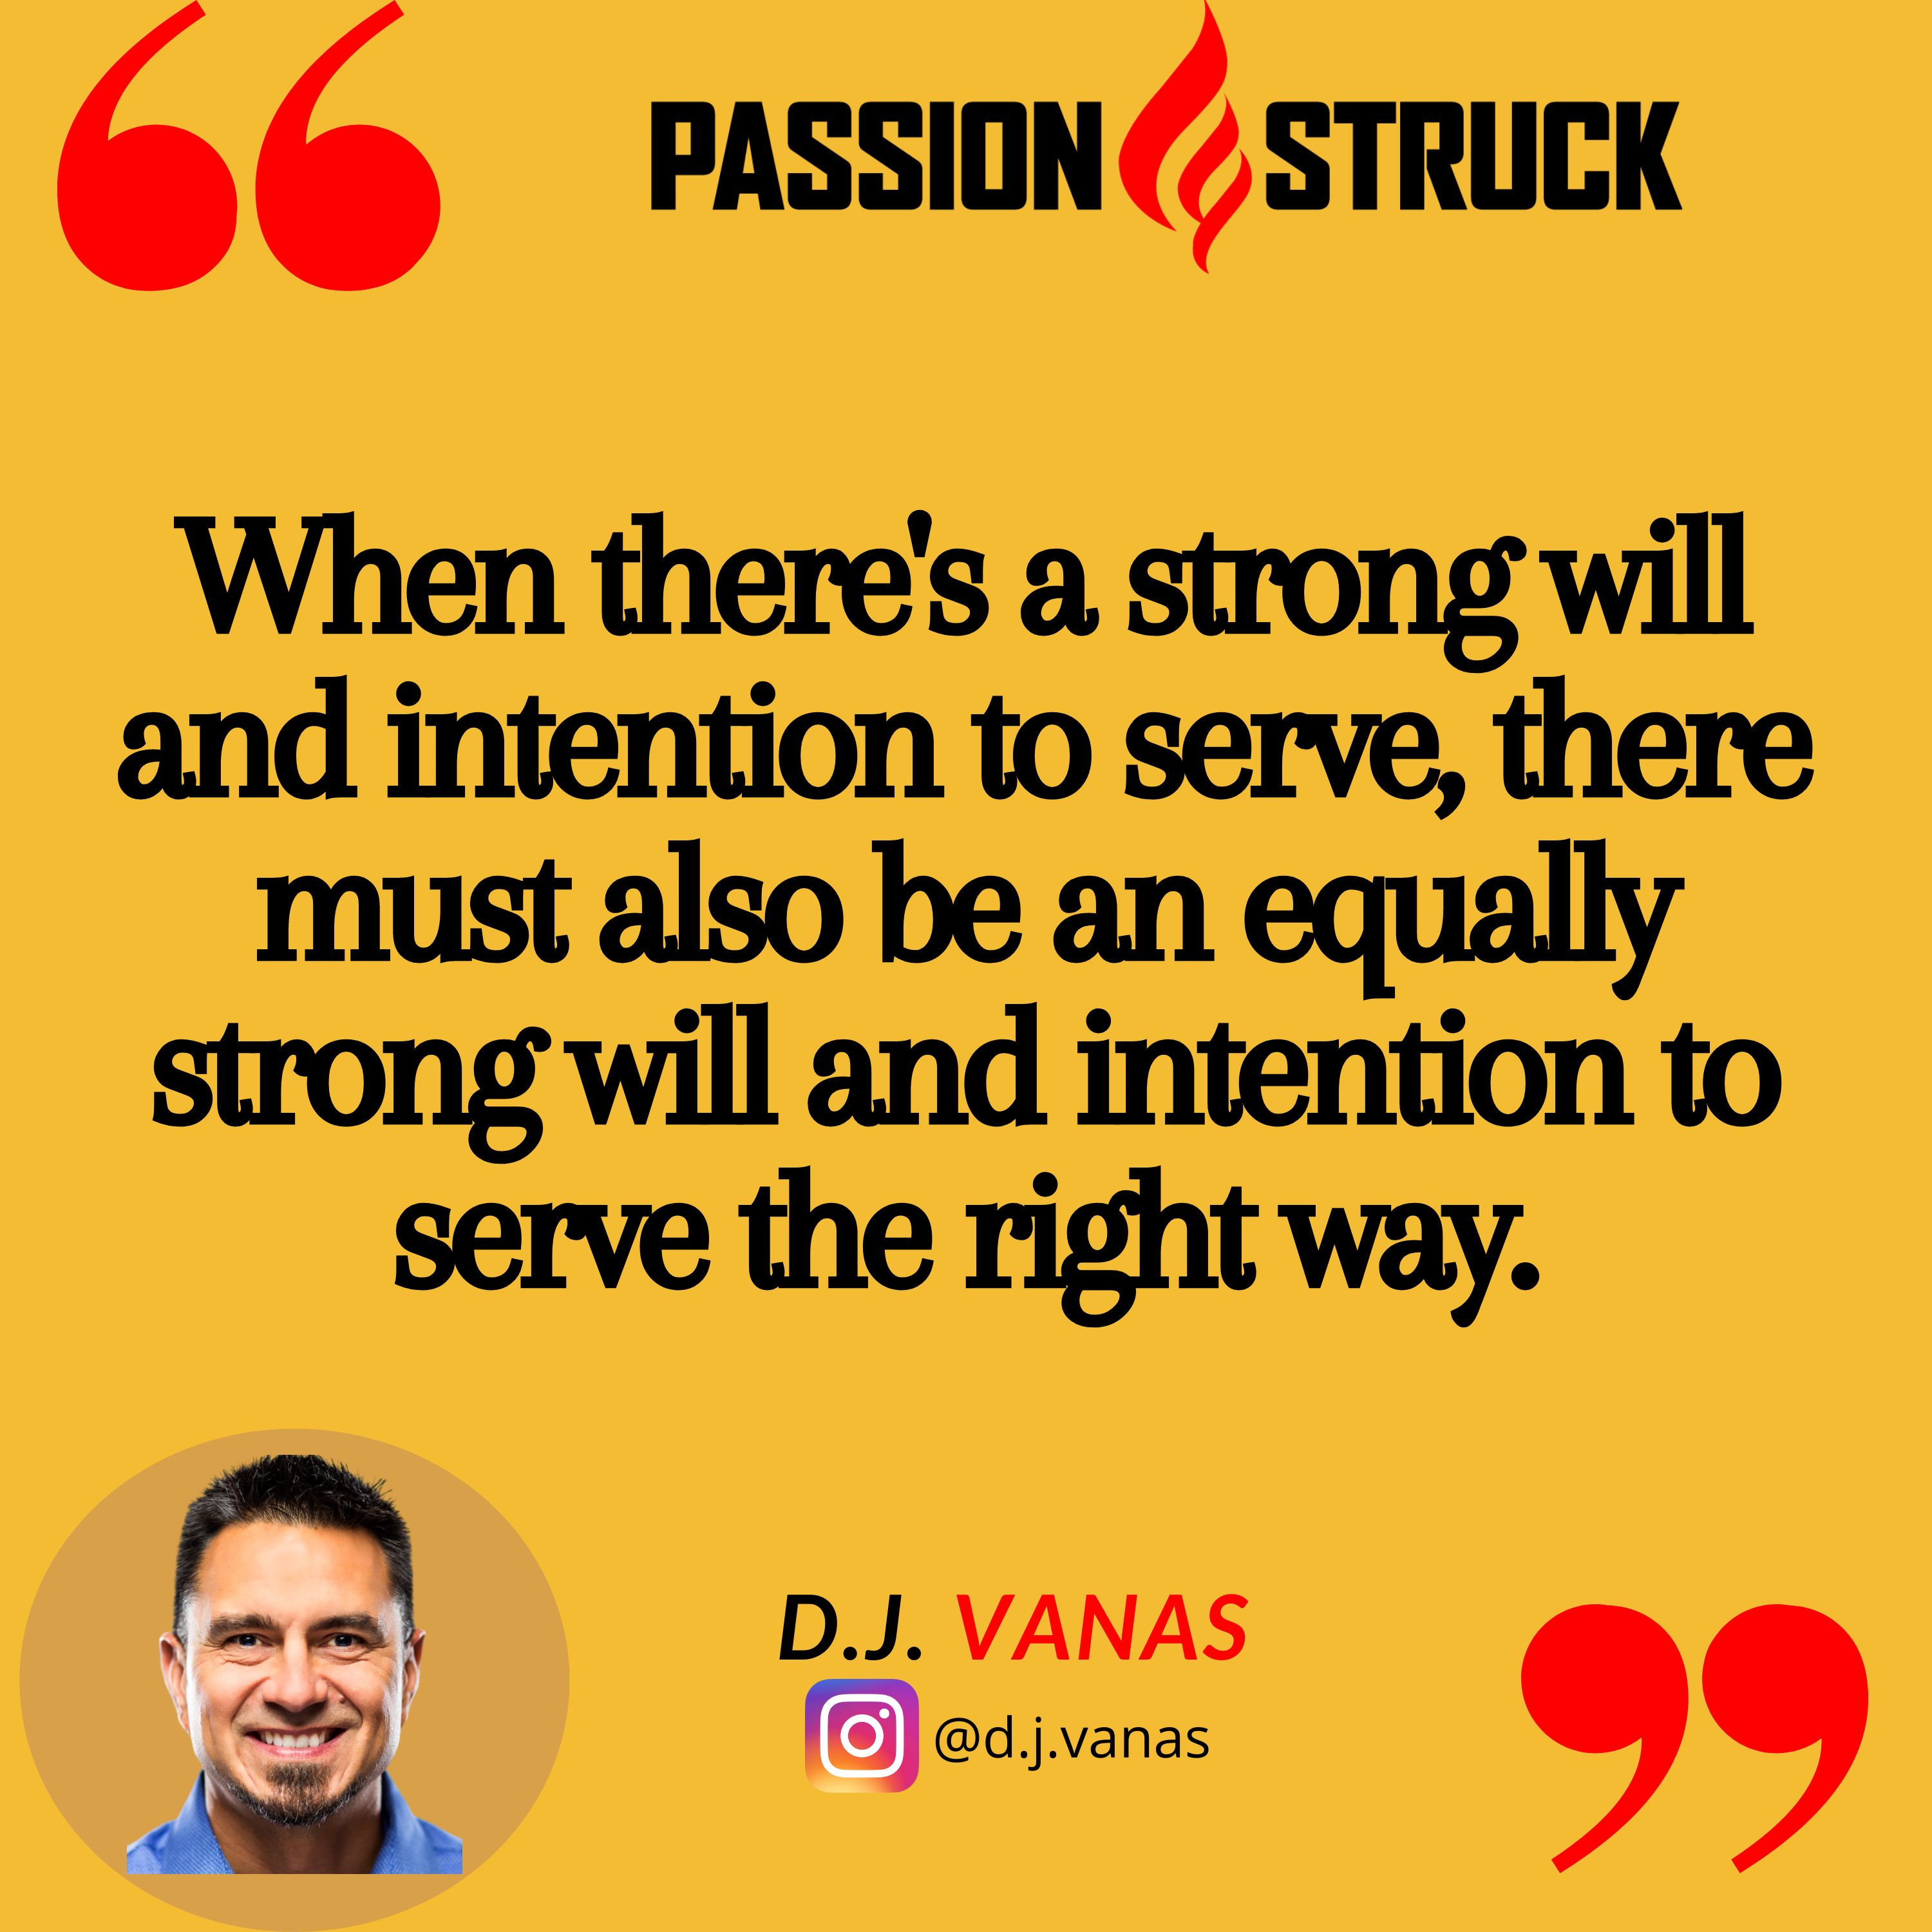 D.J. Vanas quote from Passion Struck podcast, "When there's a strong will and intention to serve, there must also be an equally strong will and intention to serve the right way."